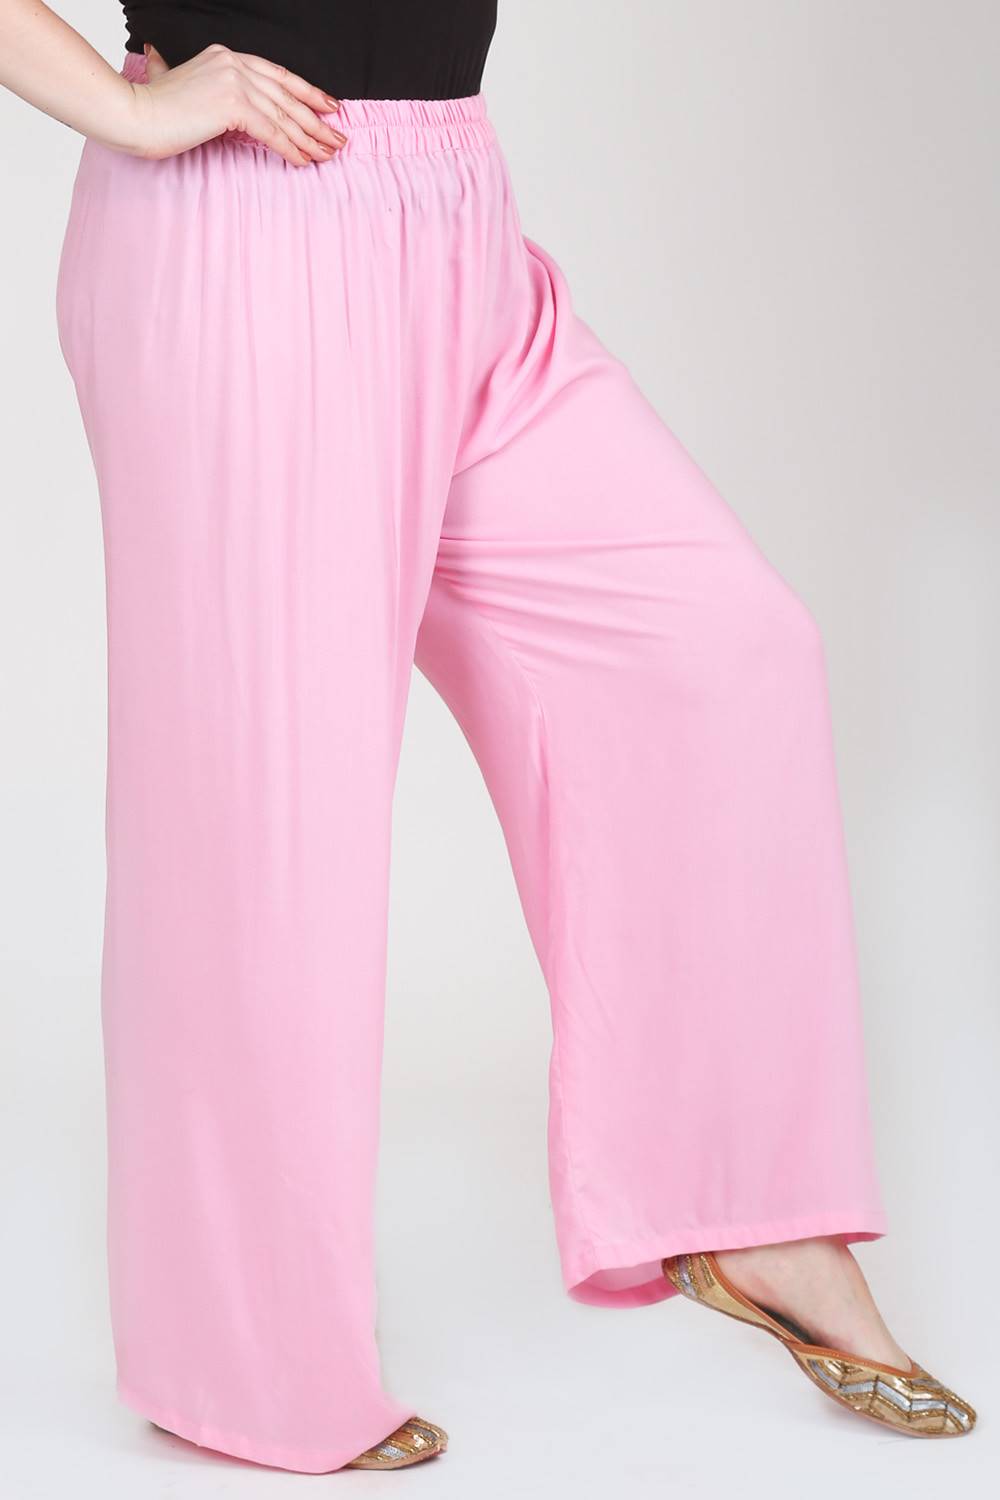 Baby pink embroidered pants by D'ART STUDIO | The Secret Label